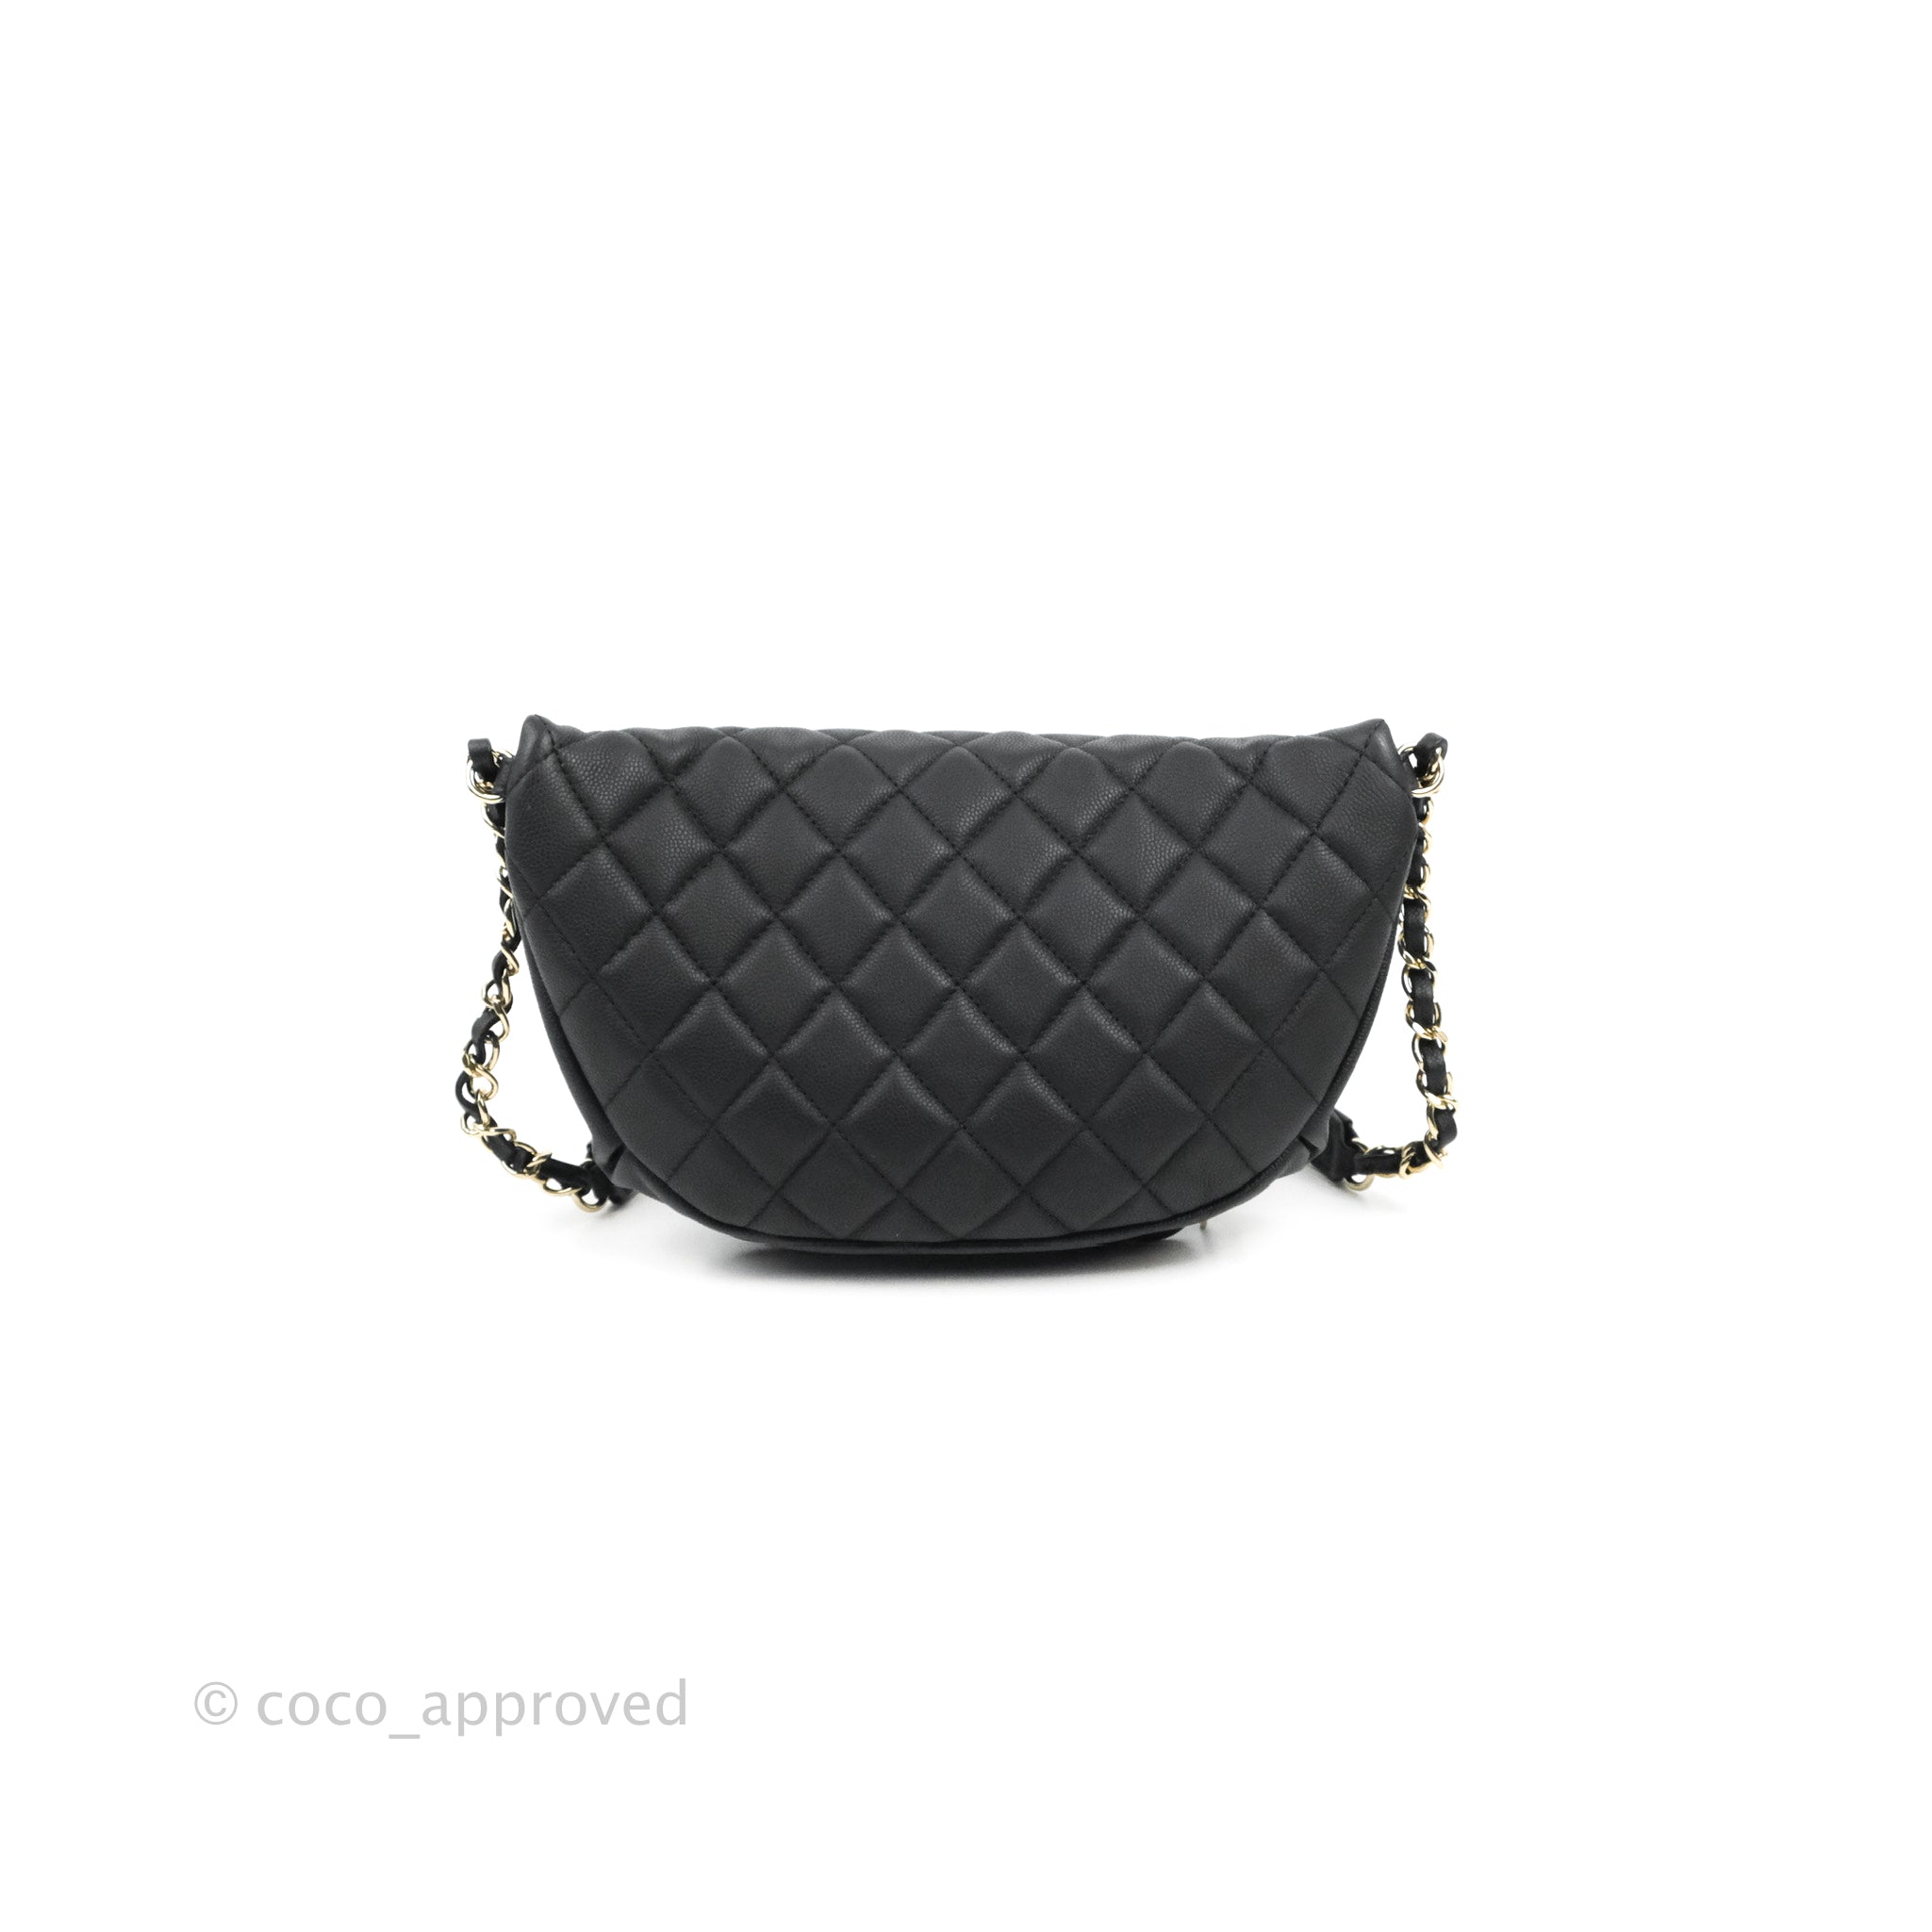 Sold at Auction: Chanel Quilted Black Lambskin Fanny Pack Bum Bag